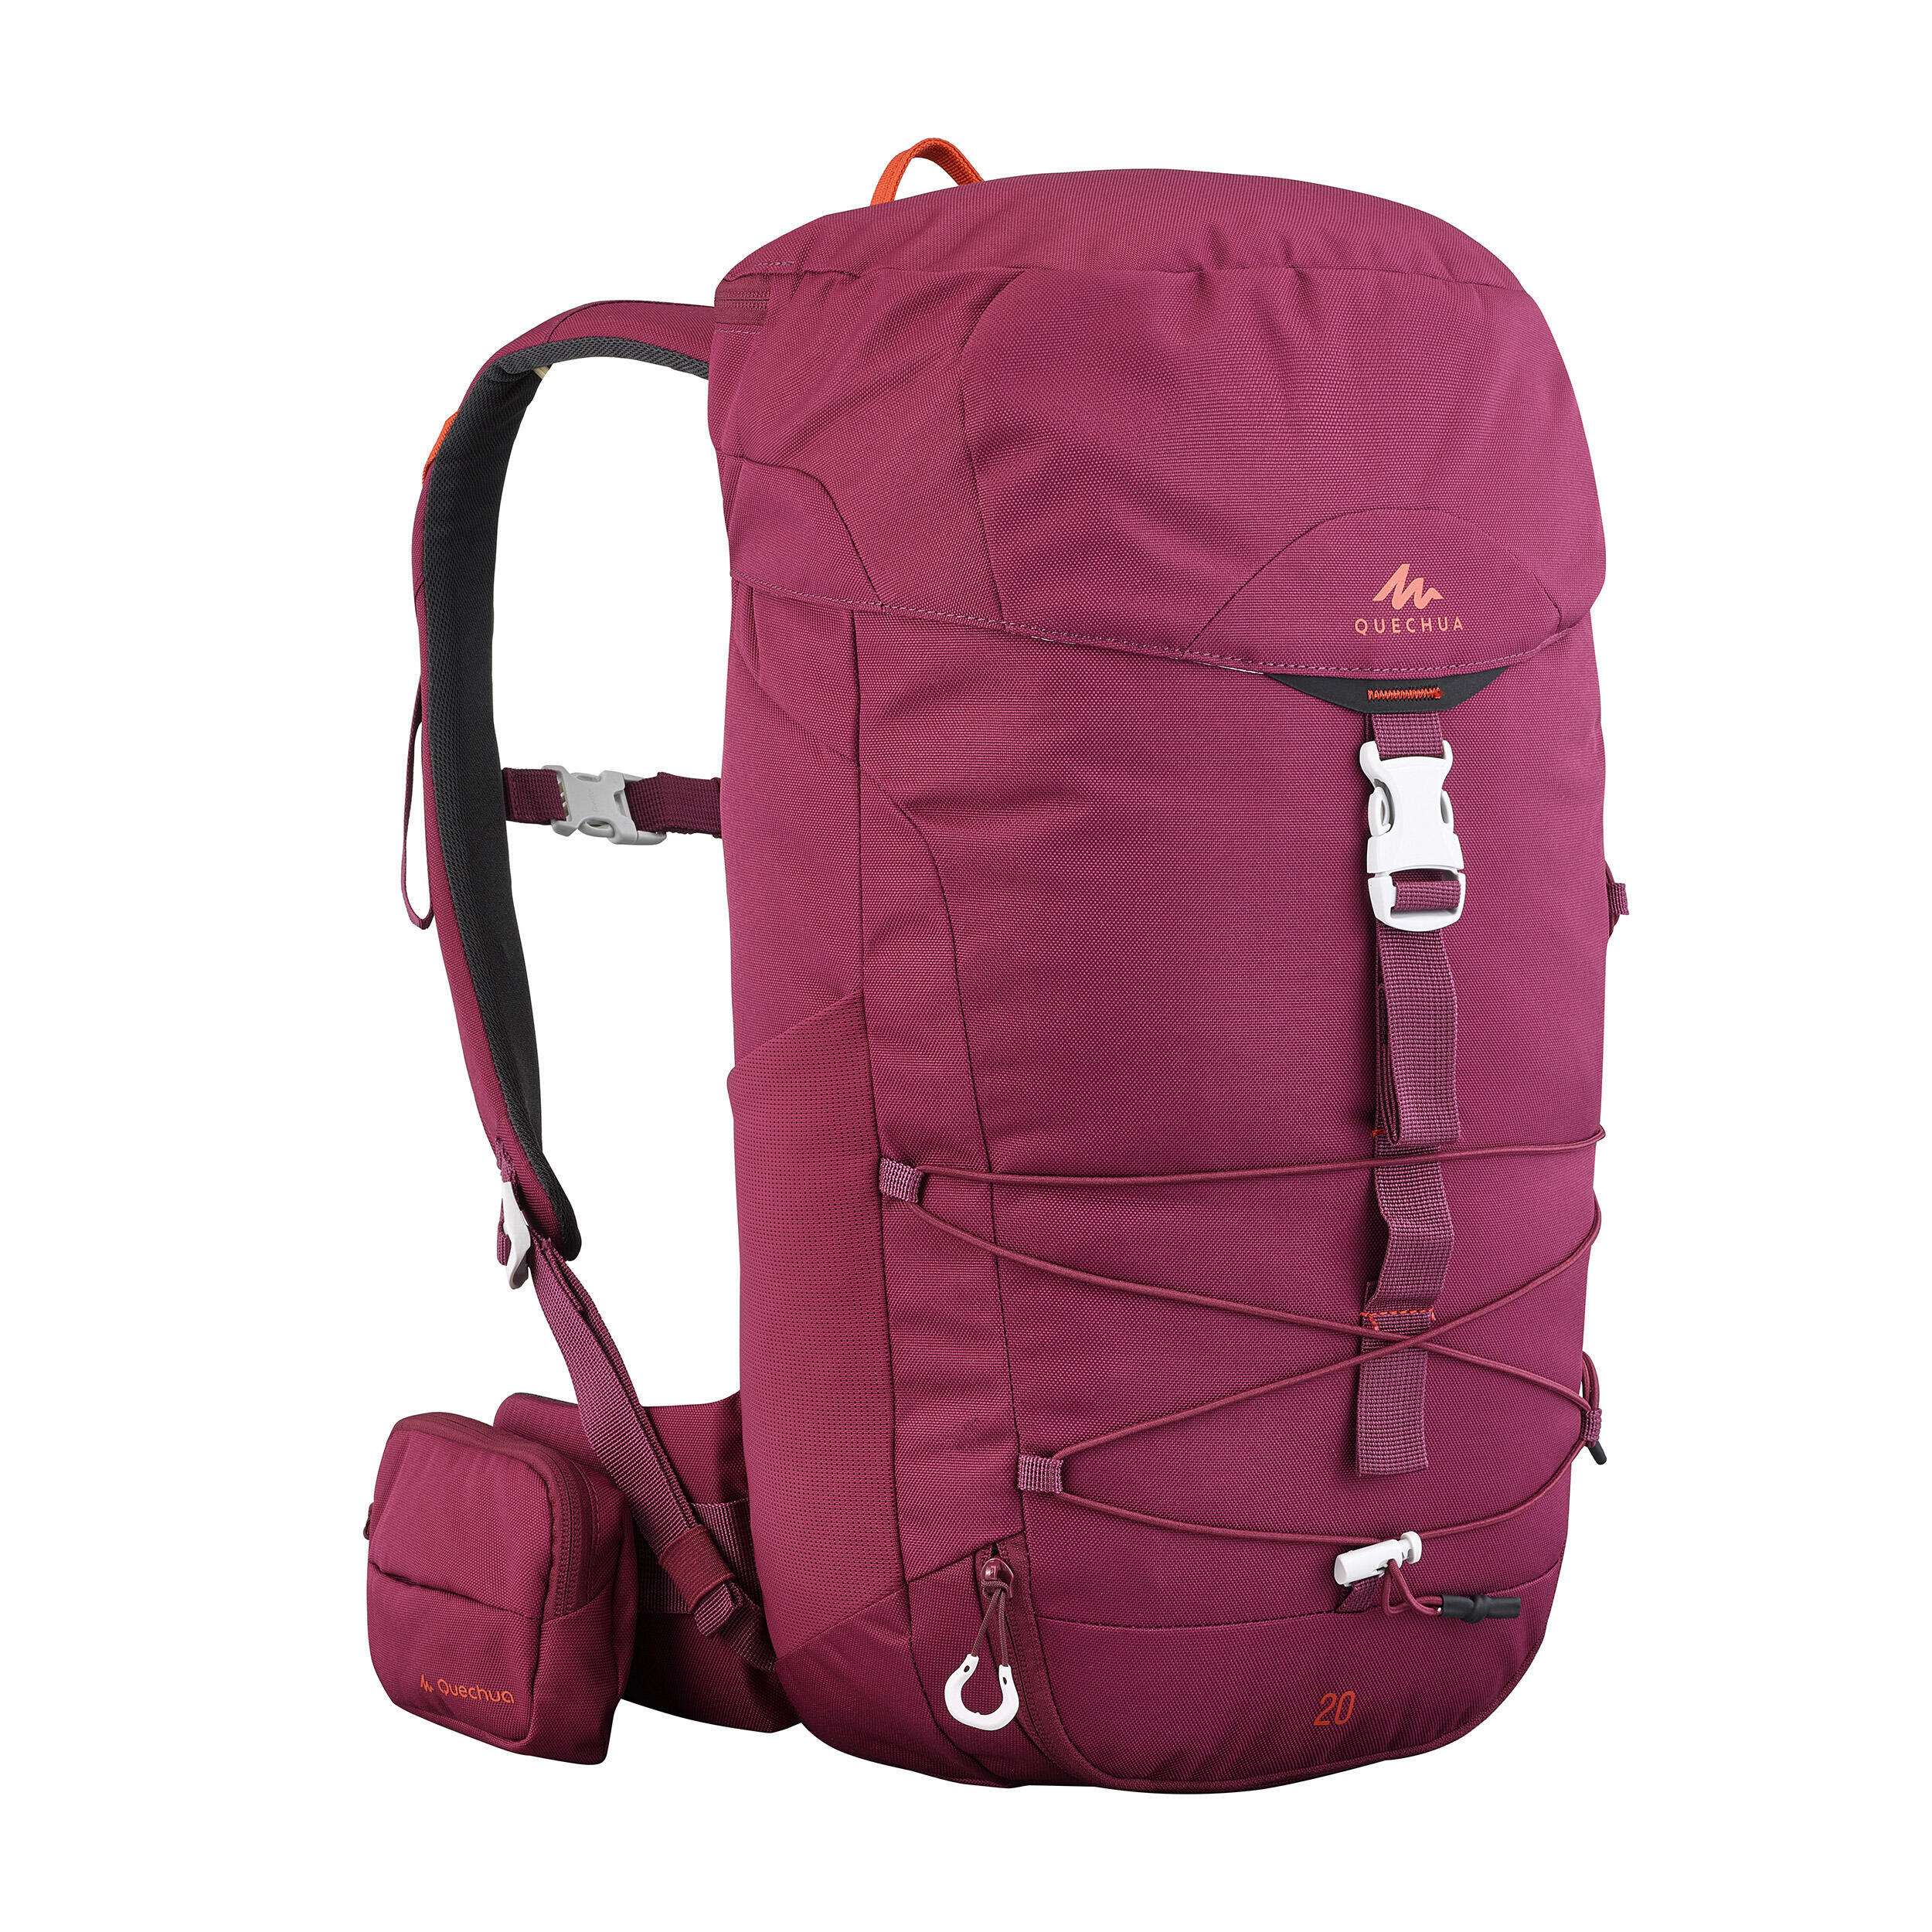 Mountain hiking backpack 20L - MH100 15/15